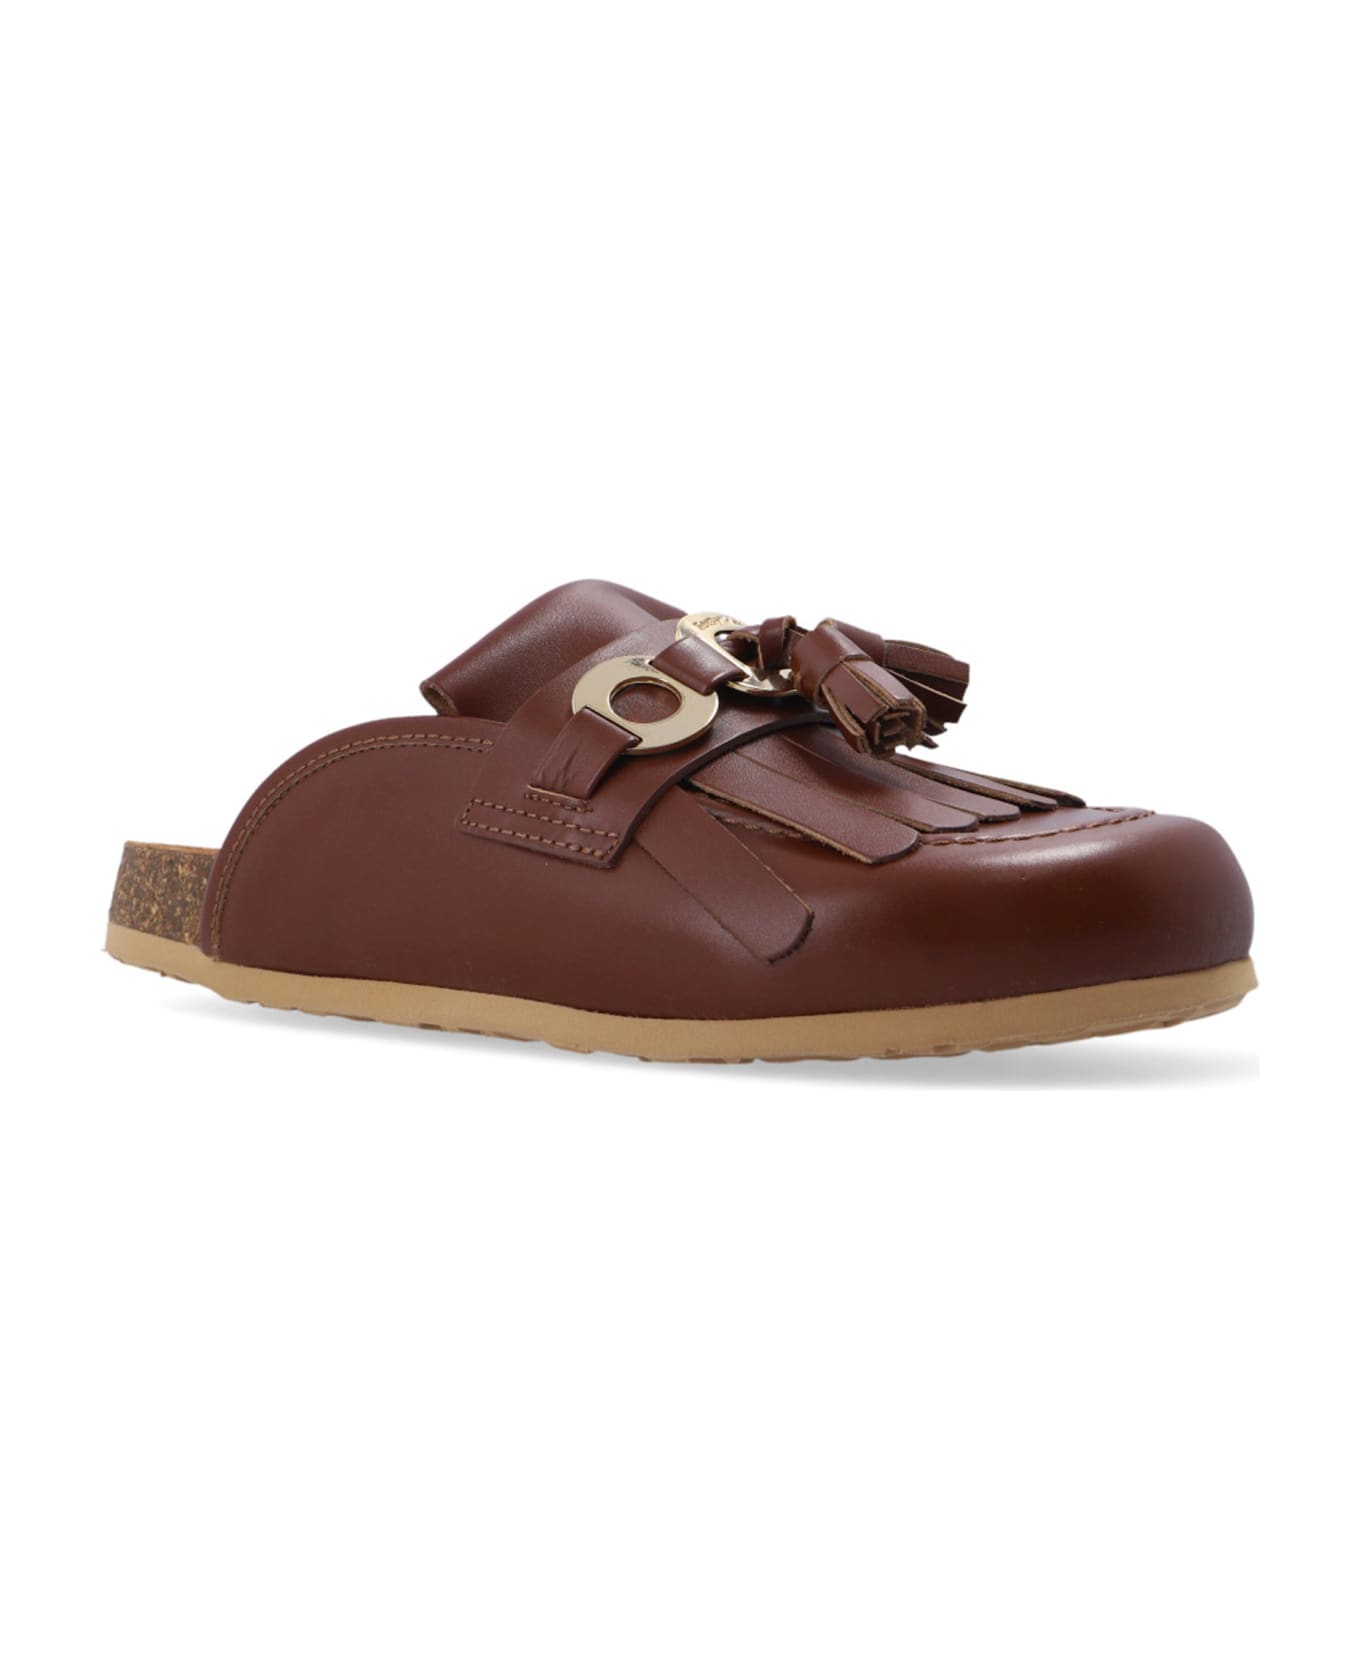 See by Chloé Lyvi Leather Mules - Brown